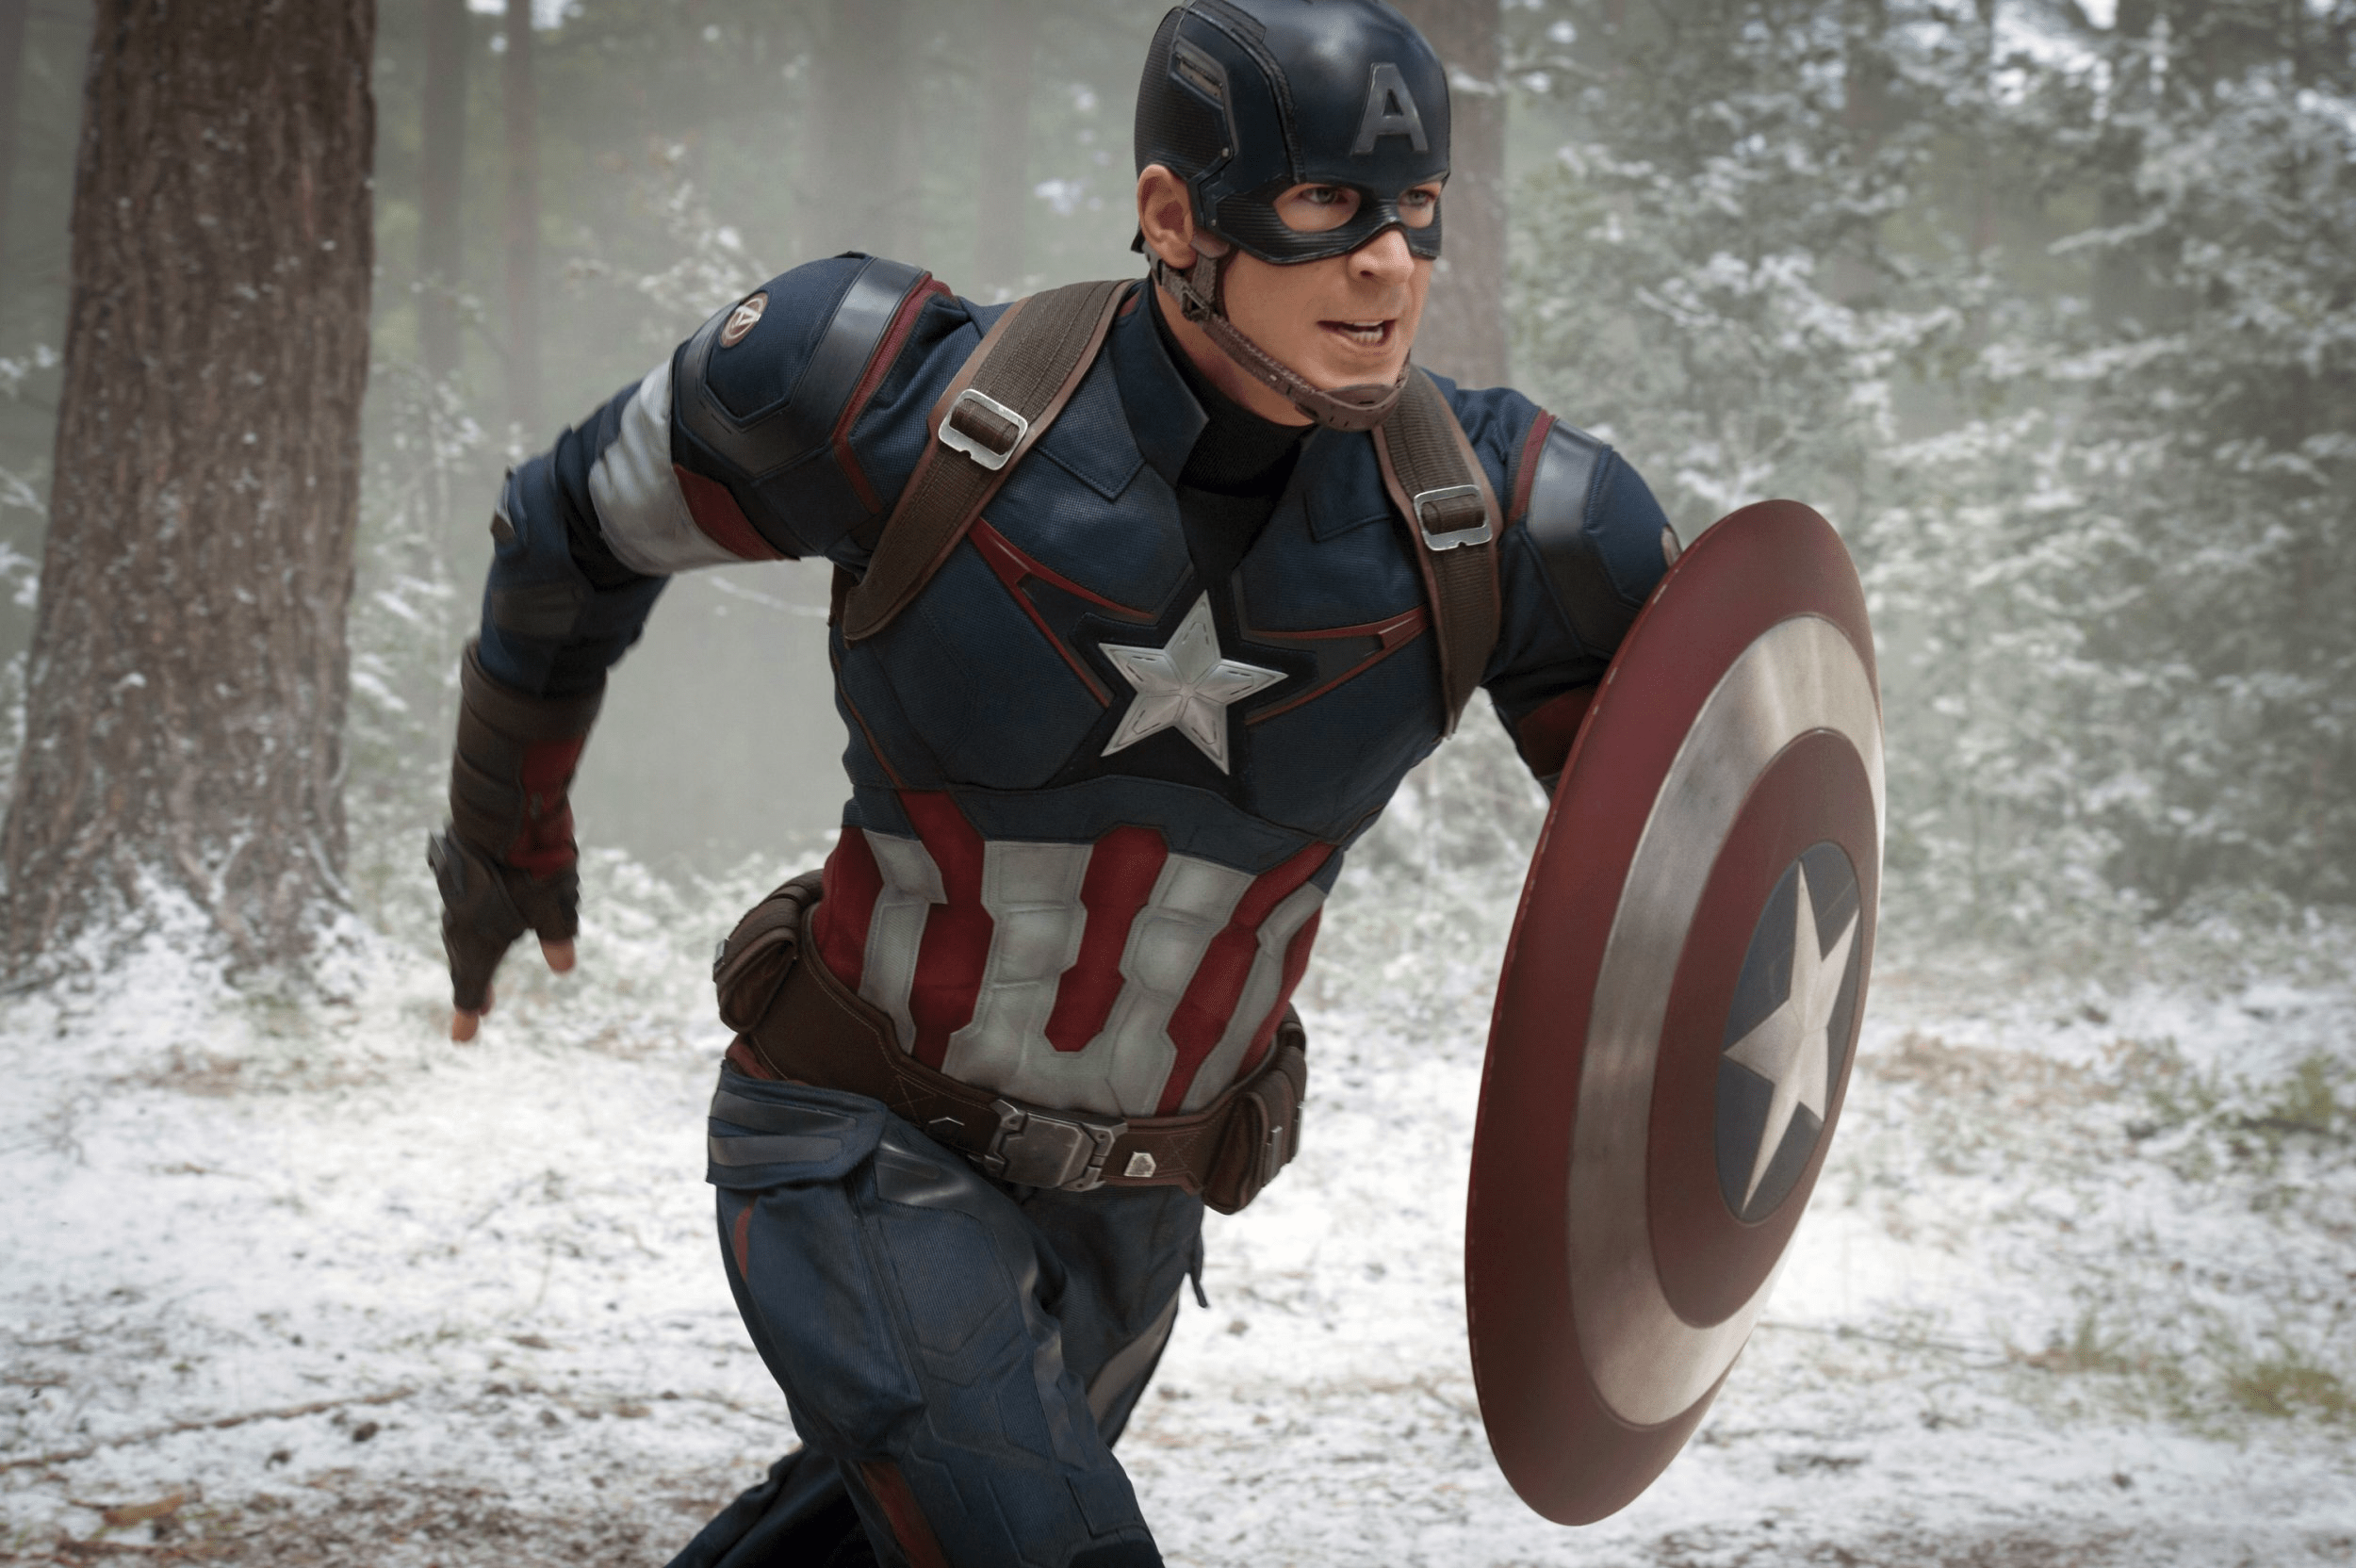 5 Highest Earnings for Actors Playing Marvel Characters